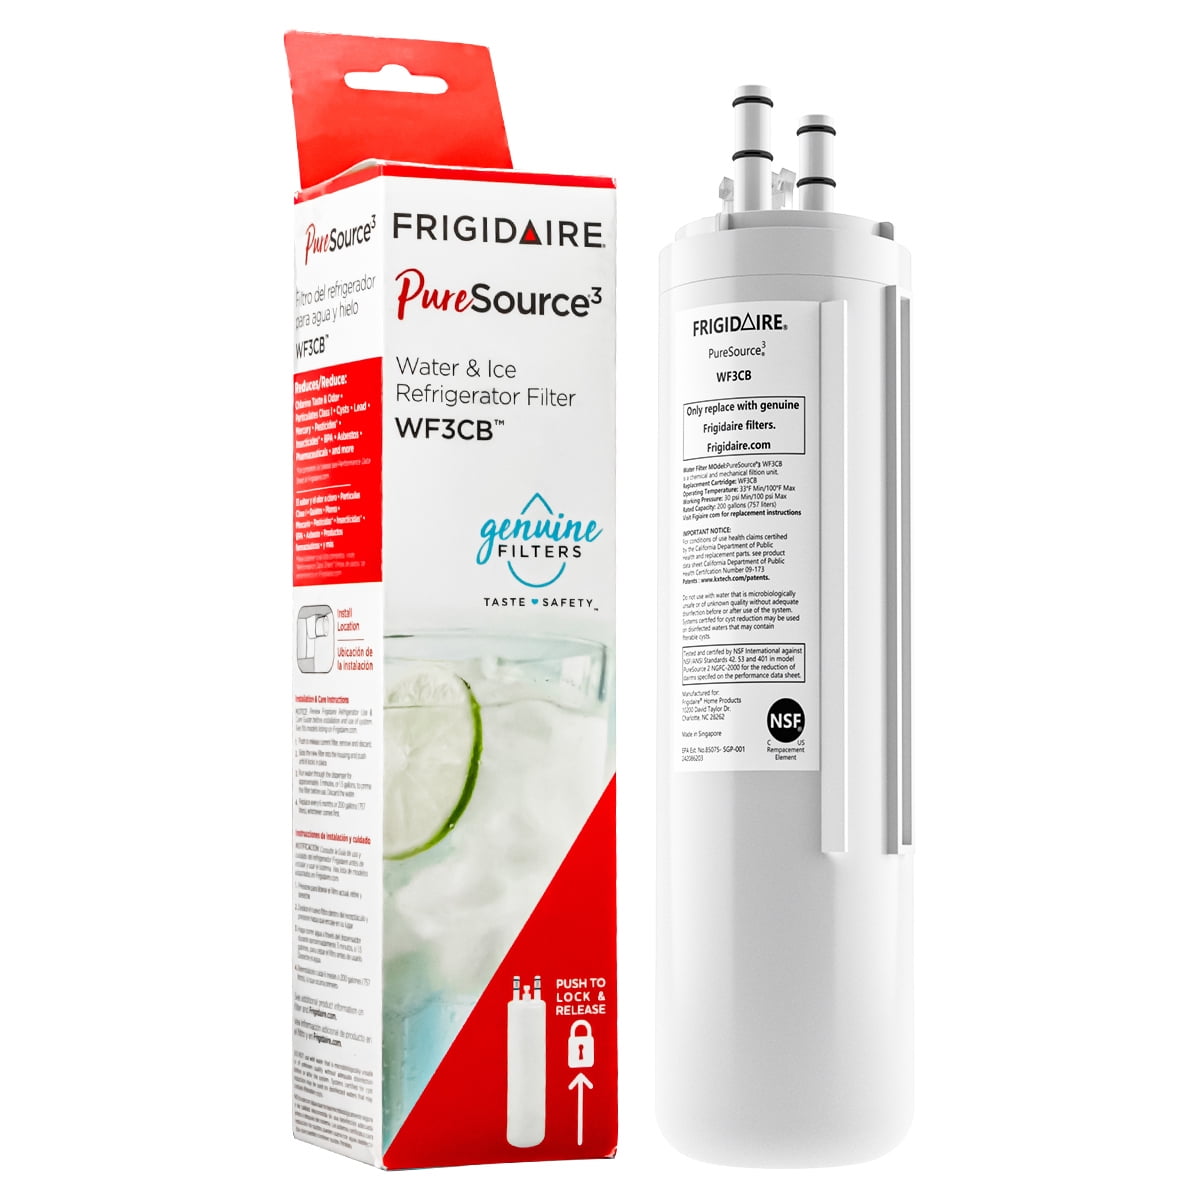 WF3CB by Frigidaire - Frigidaire PureSource® 3 Water and Ice